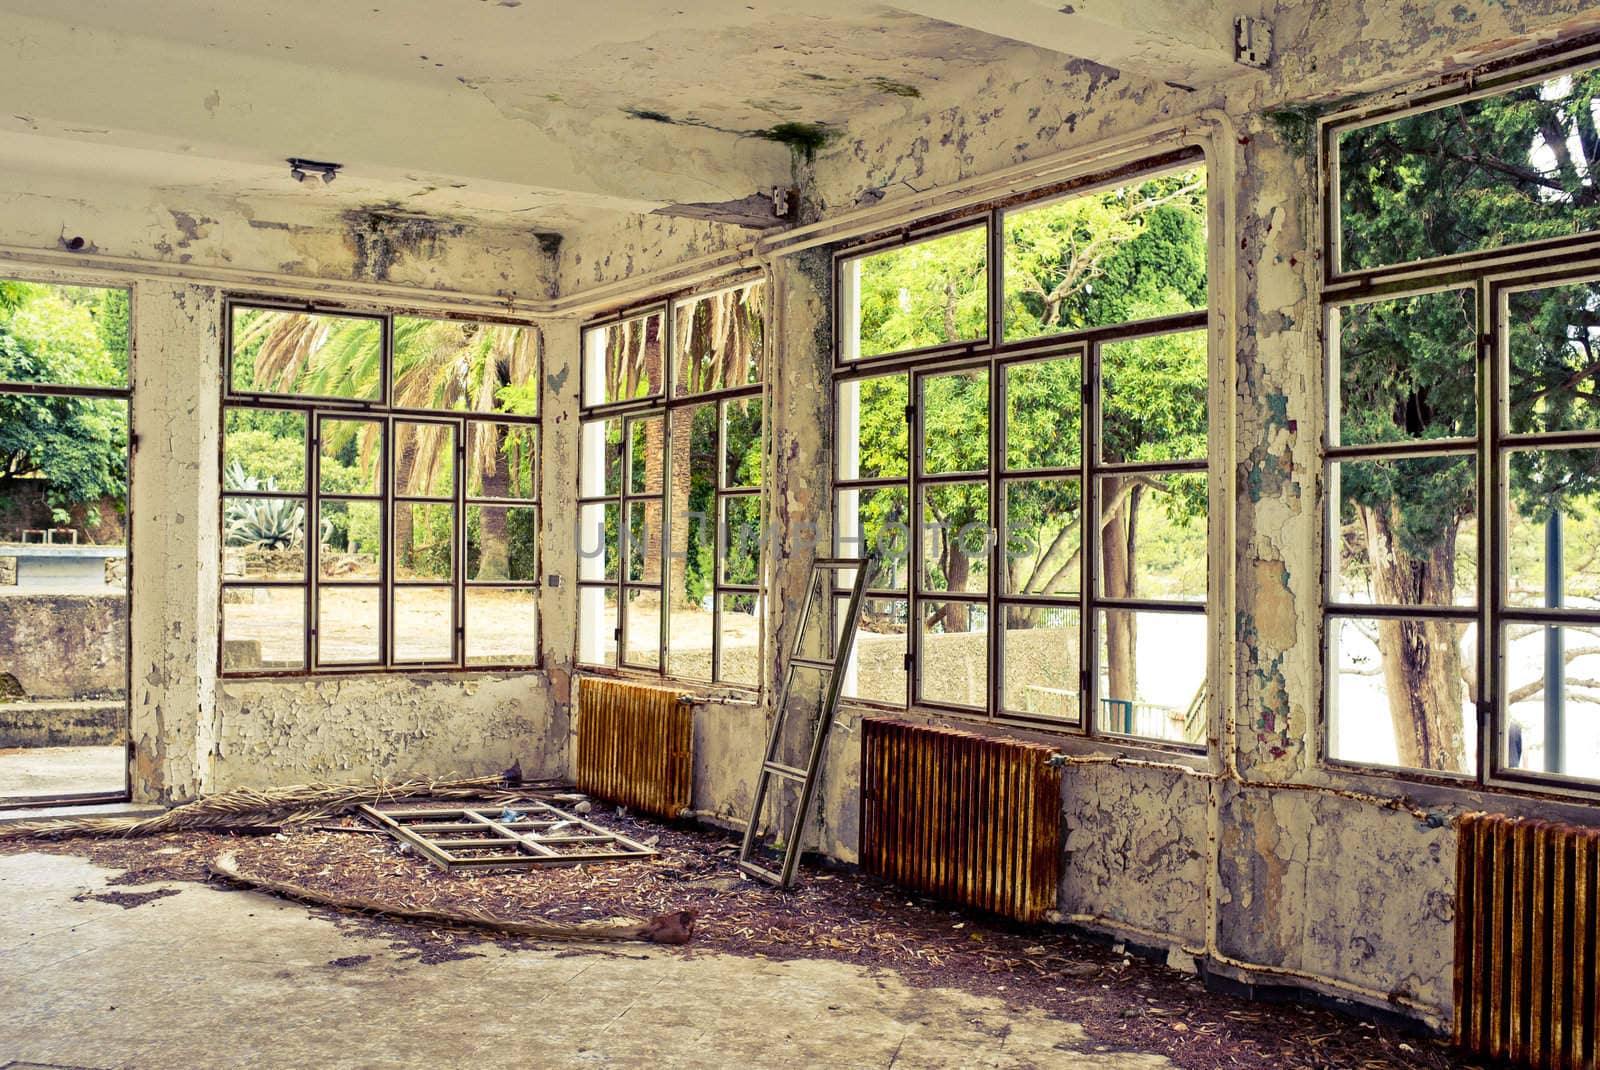 Interior from abandoned home after the war in Croatia. Image cross processed to reflect time and decay.